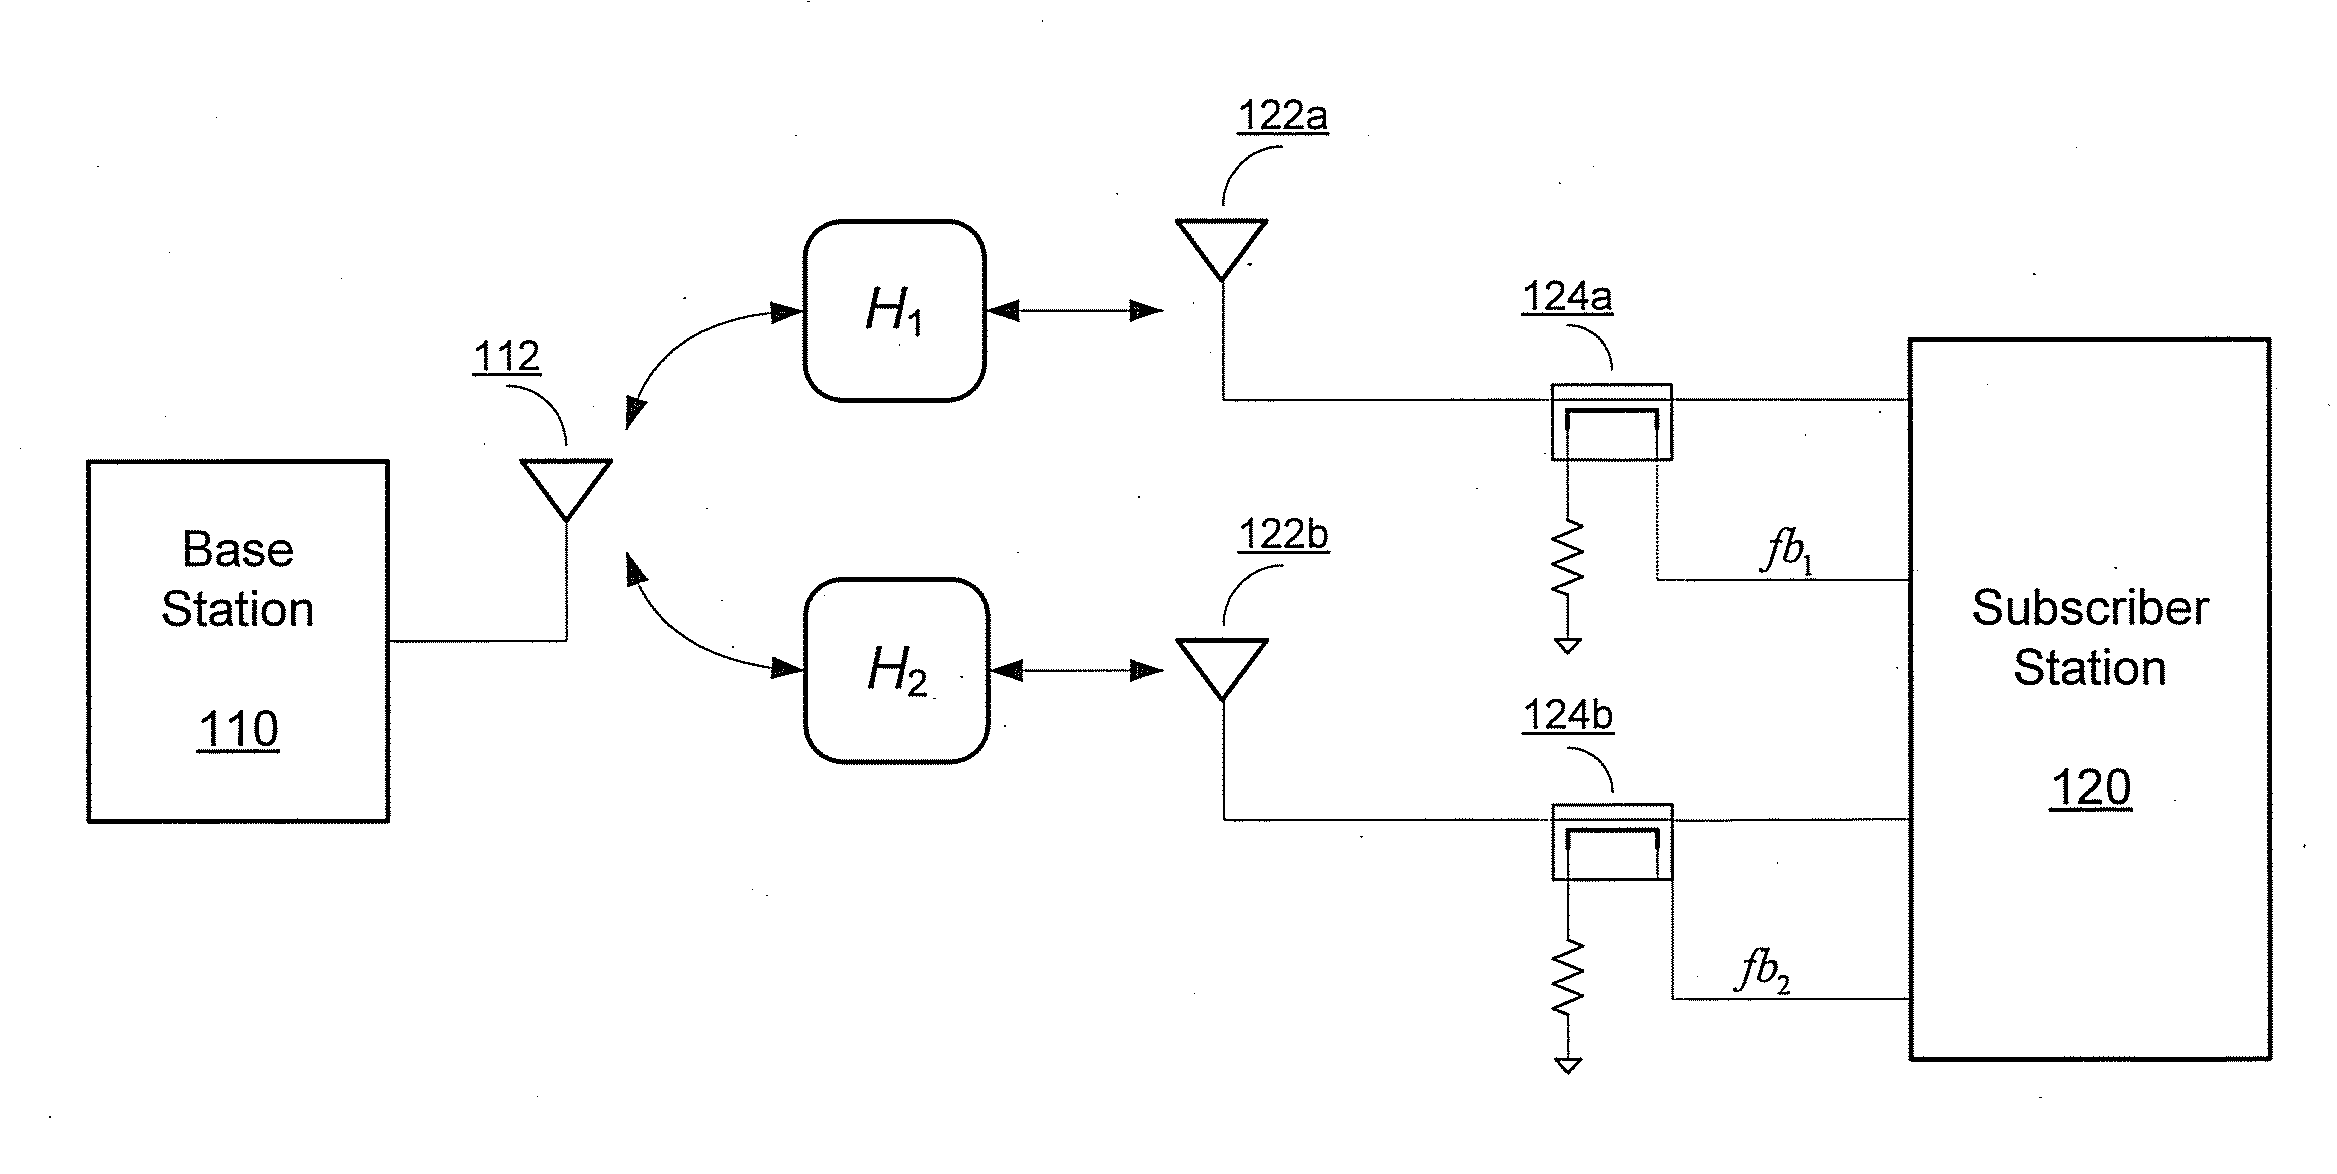 Method and system for uplink beamforming calibration in a multi-antenna wireless communication system